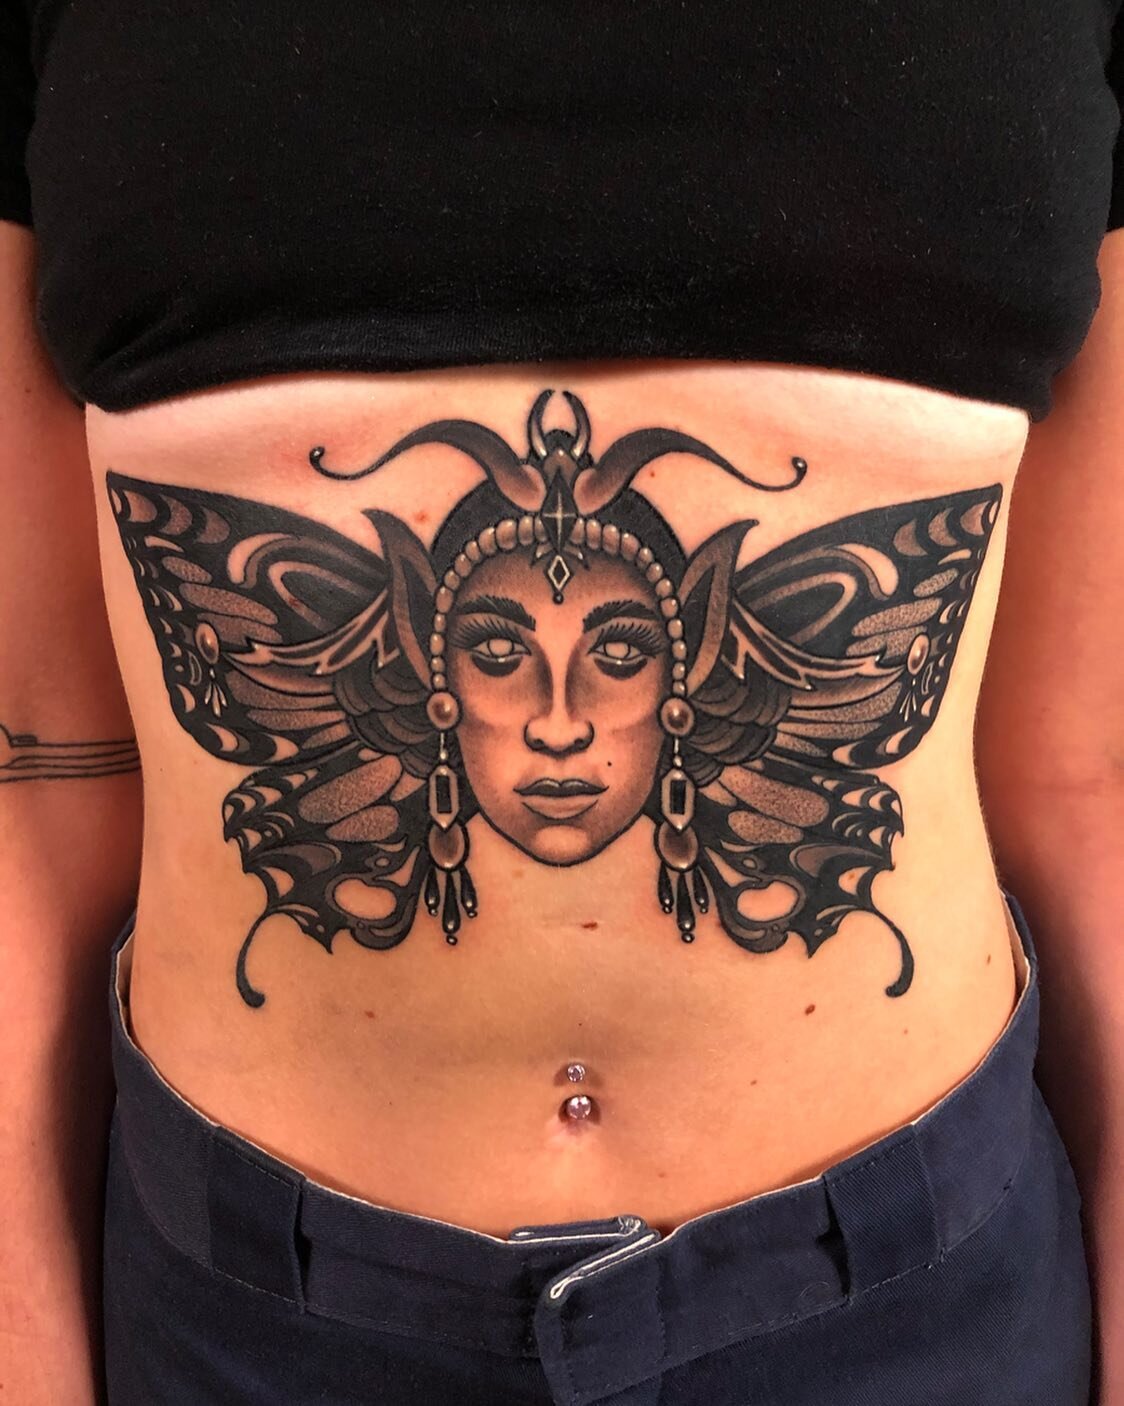 Just a little tummy tickler! Thanks again, Toni 👊🏼
&bull;
To book an appointment, hit the link in my bio 🎉 or email me directly to t_burtz@yahoo.com
&bull;
&bull;
&bull;
&bull;
#missinglinktattoo #supportart #tattoo #art #savemyink #tattooistartma